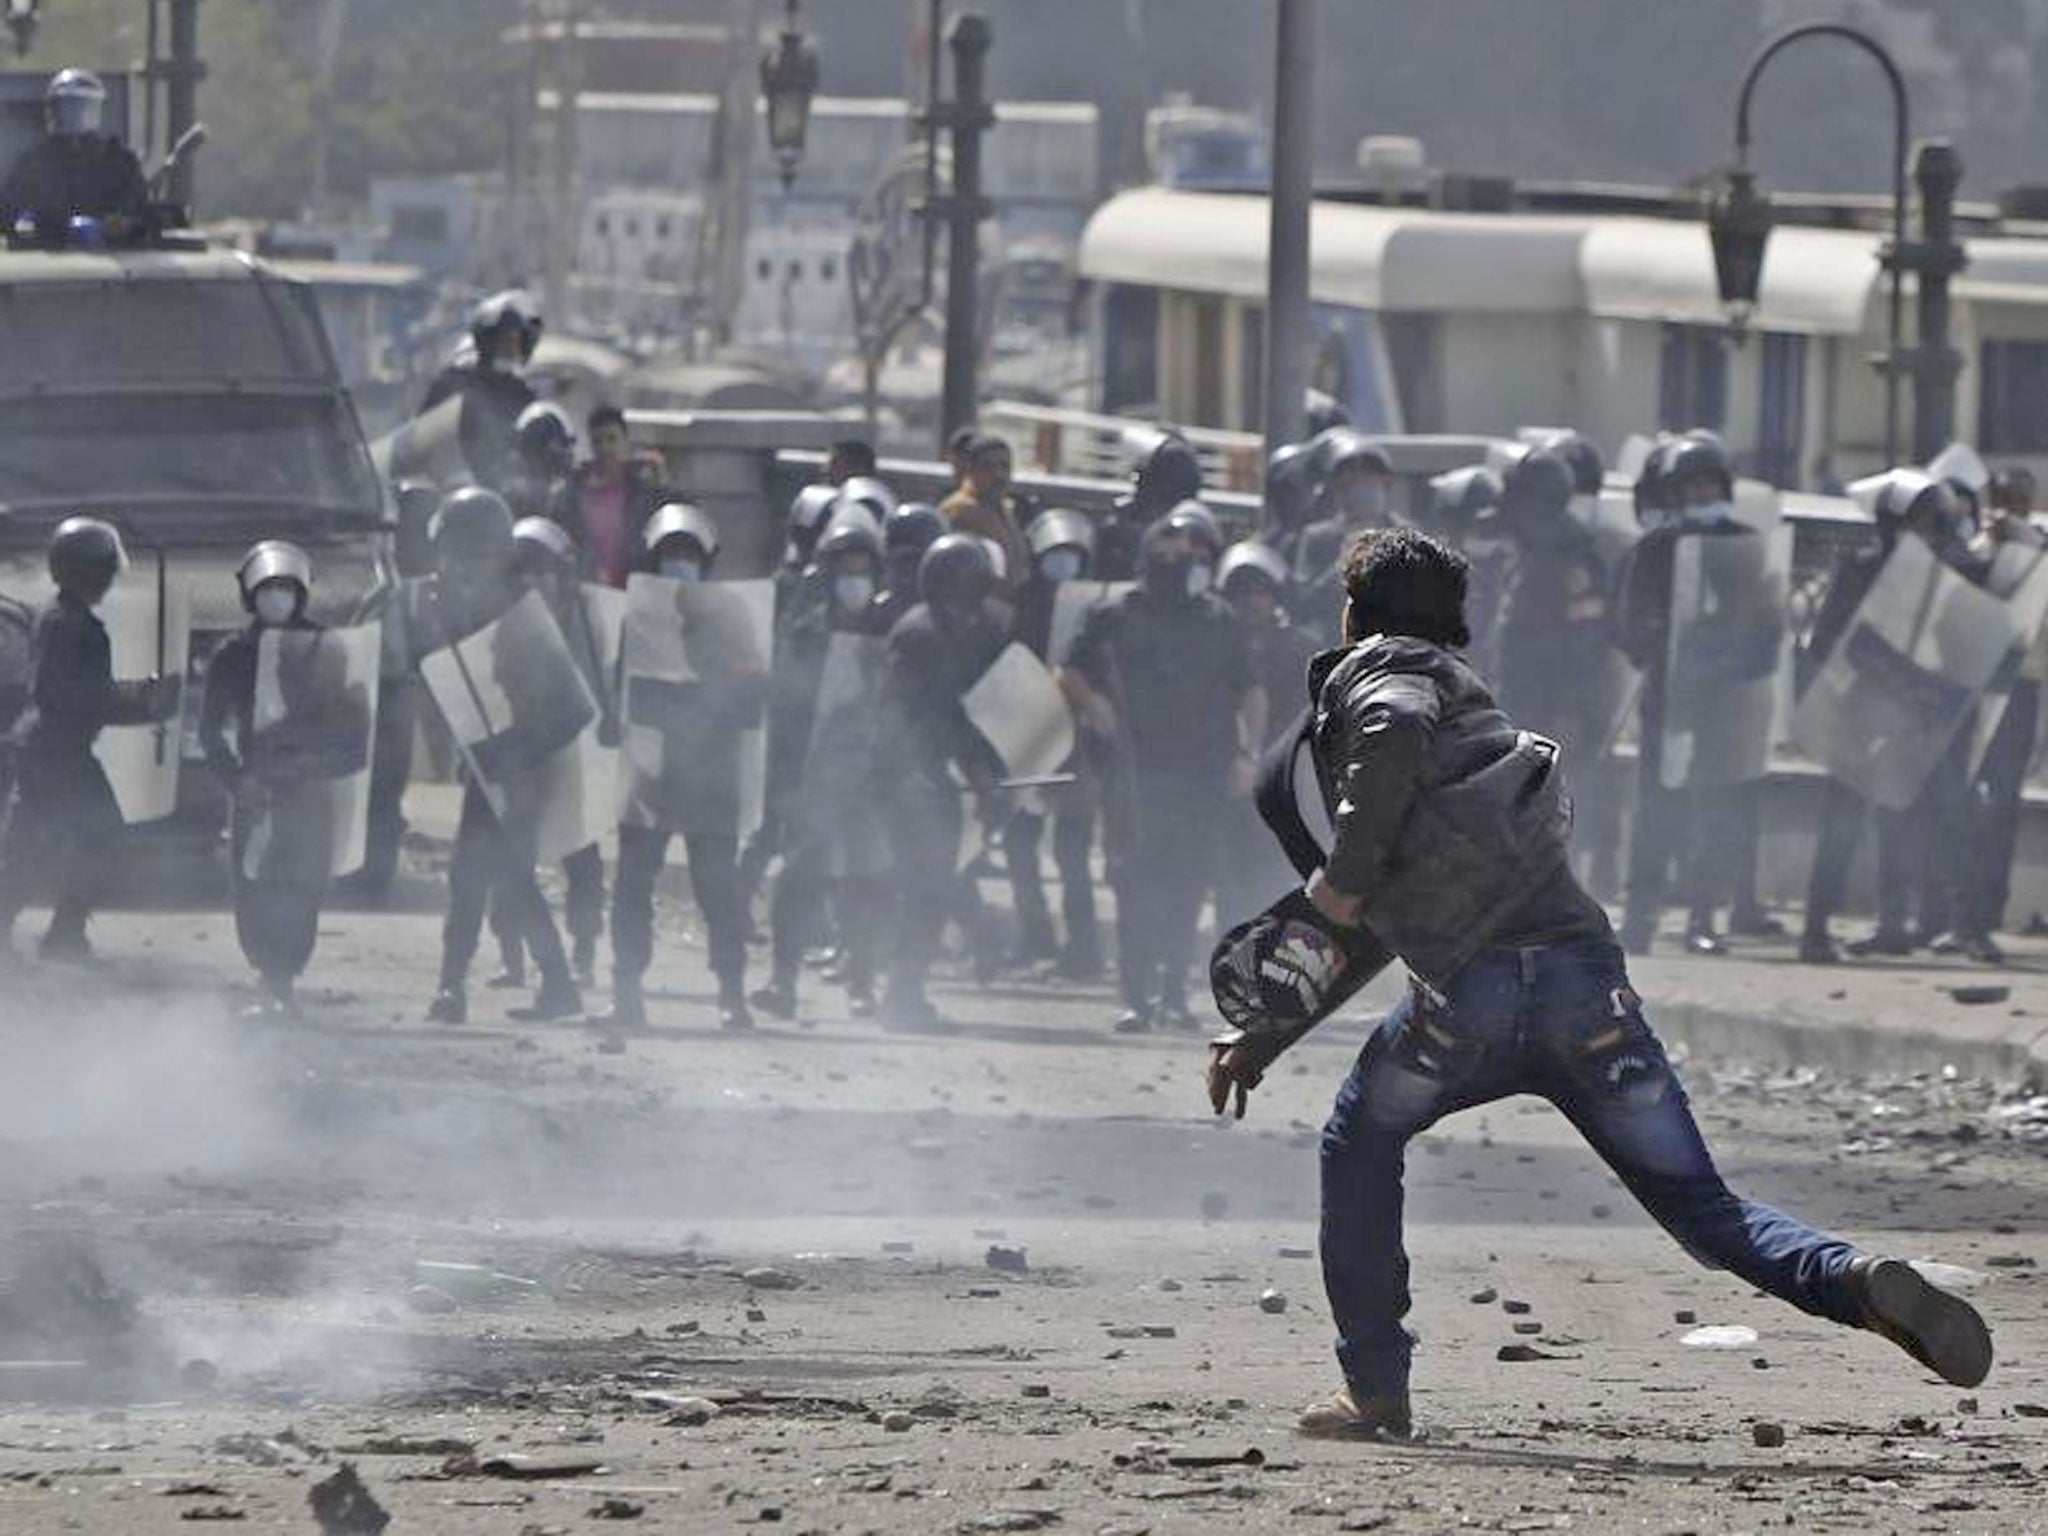 A protester opposing Egyptian President Morsi throws stone at riot police during clashes